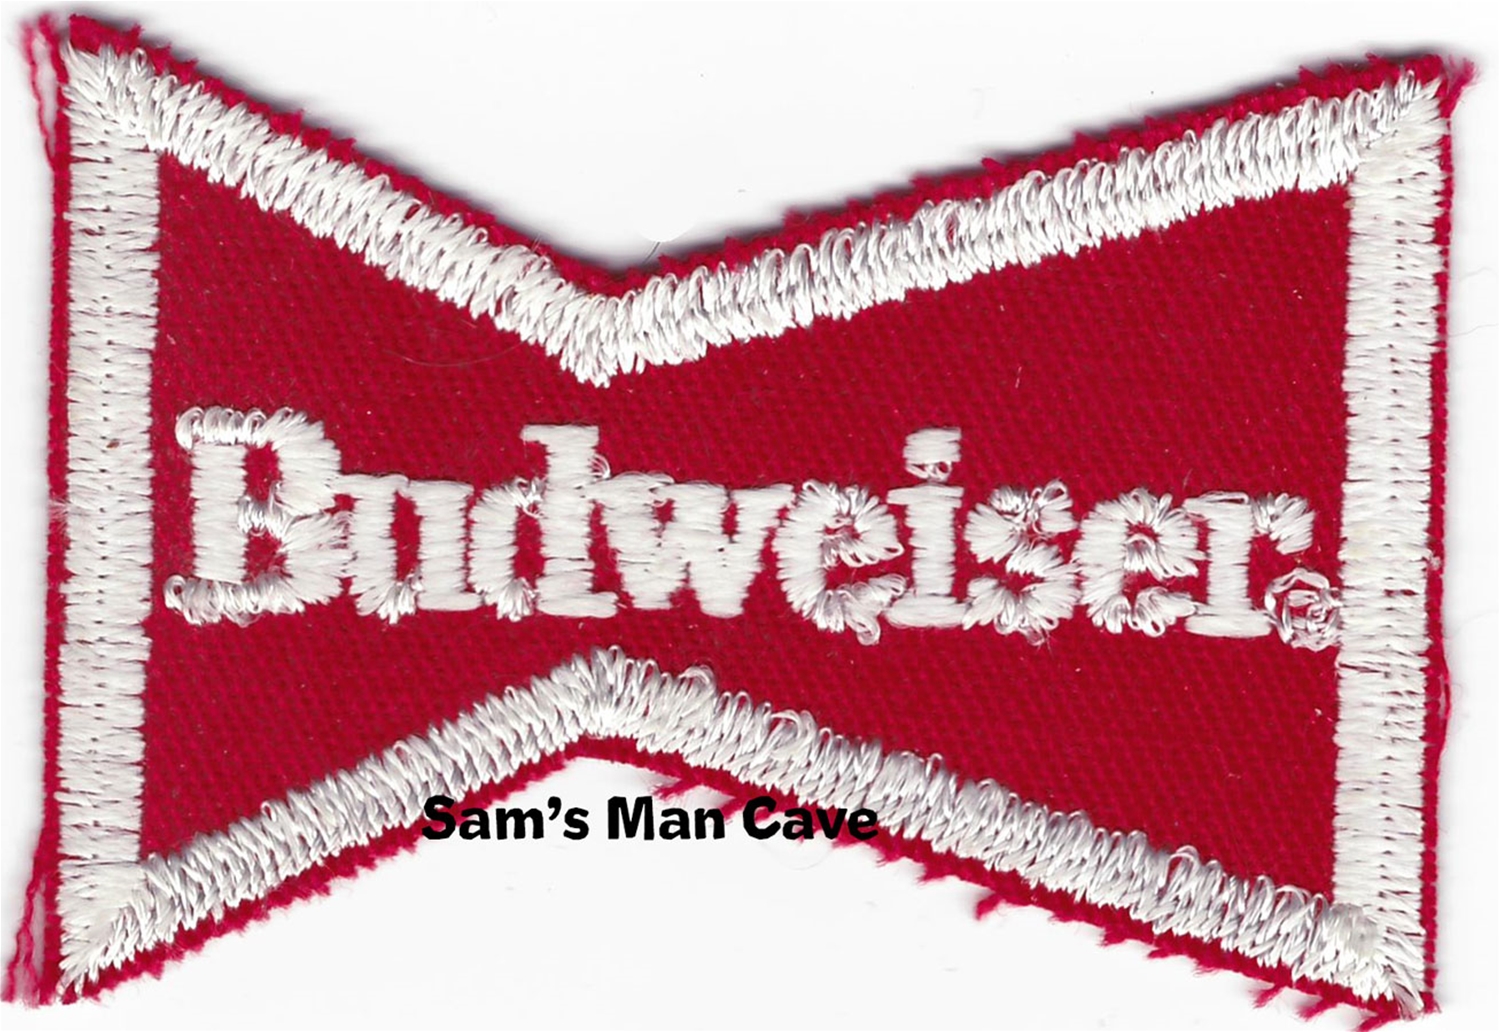 Budweiser Bowtie Beer Patch front of patch